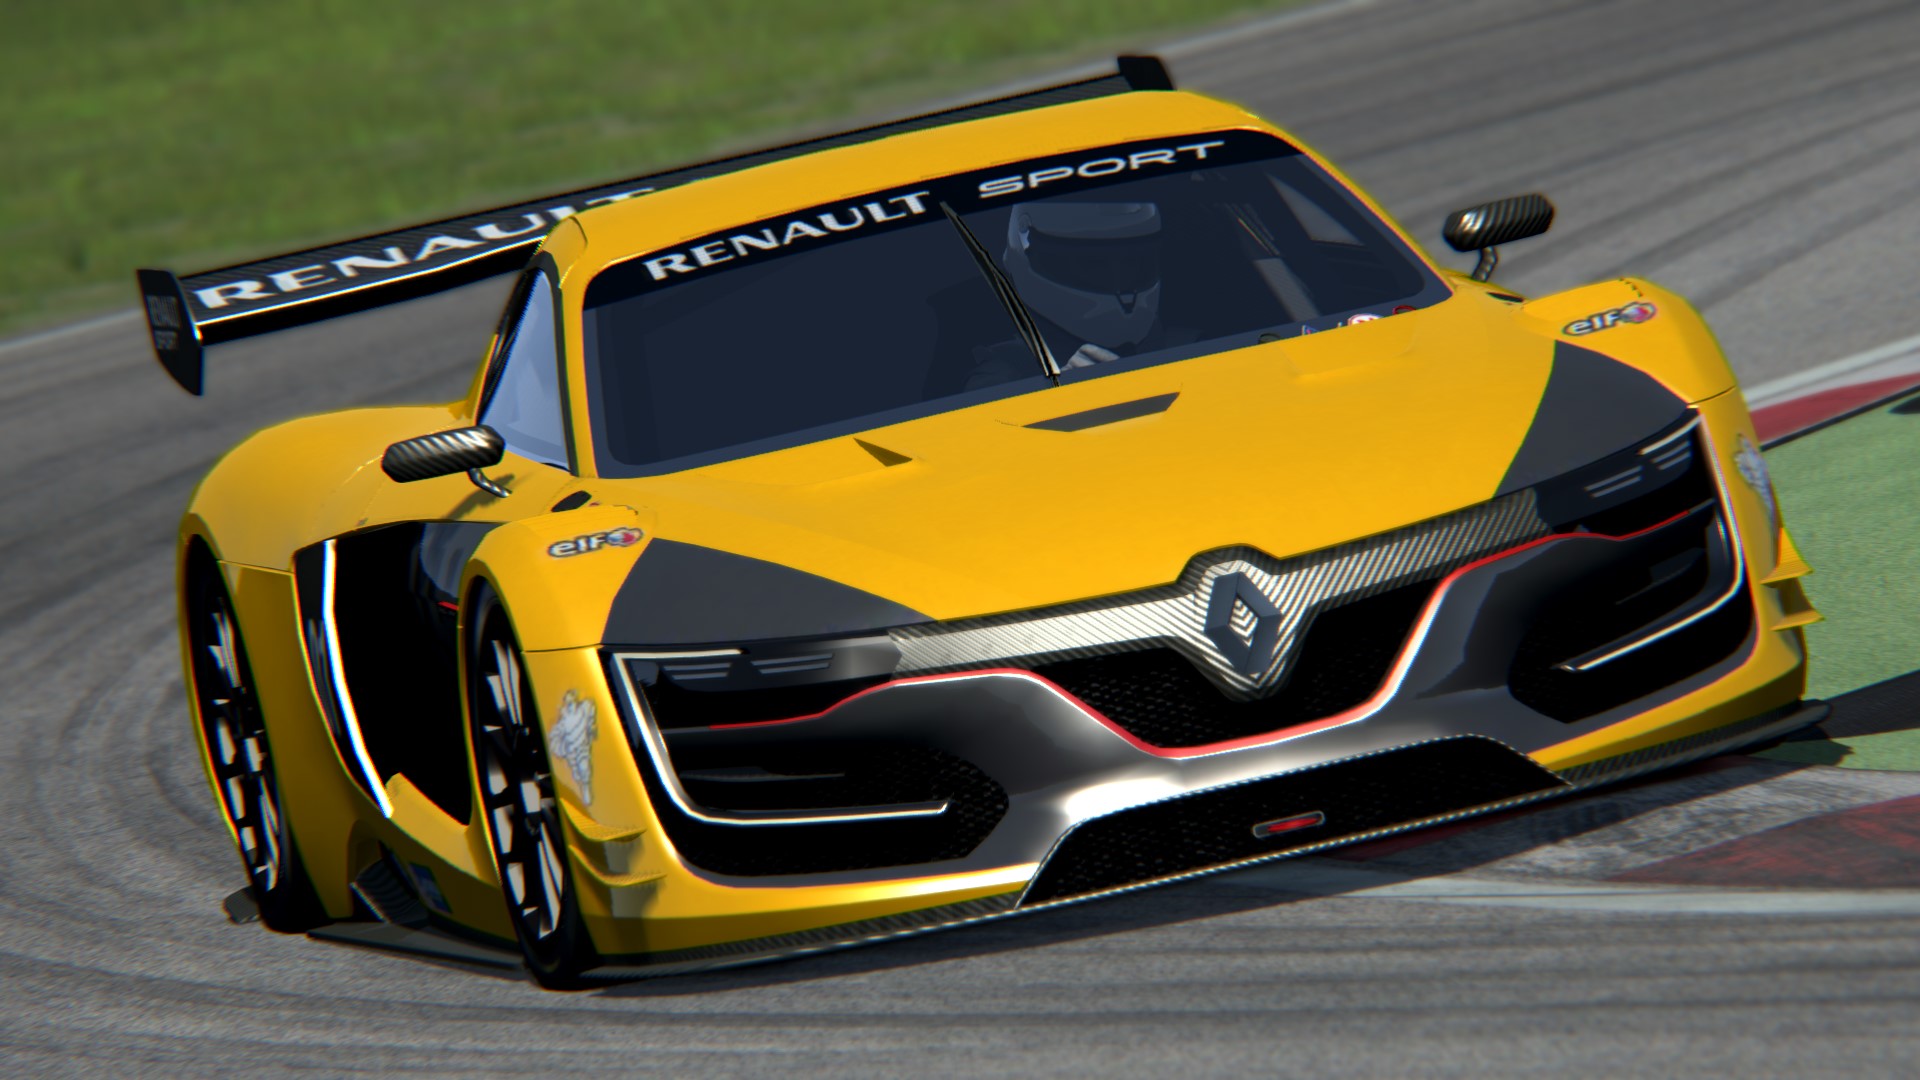 assetto_corsa___renault_rs01___imola_by_maxoulepilote-d98hus2